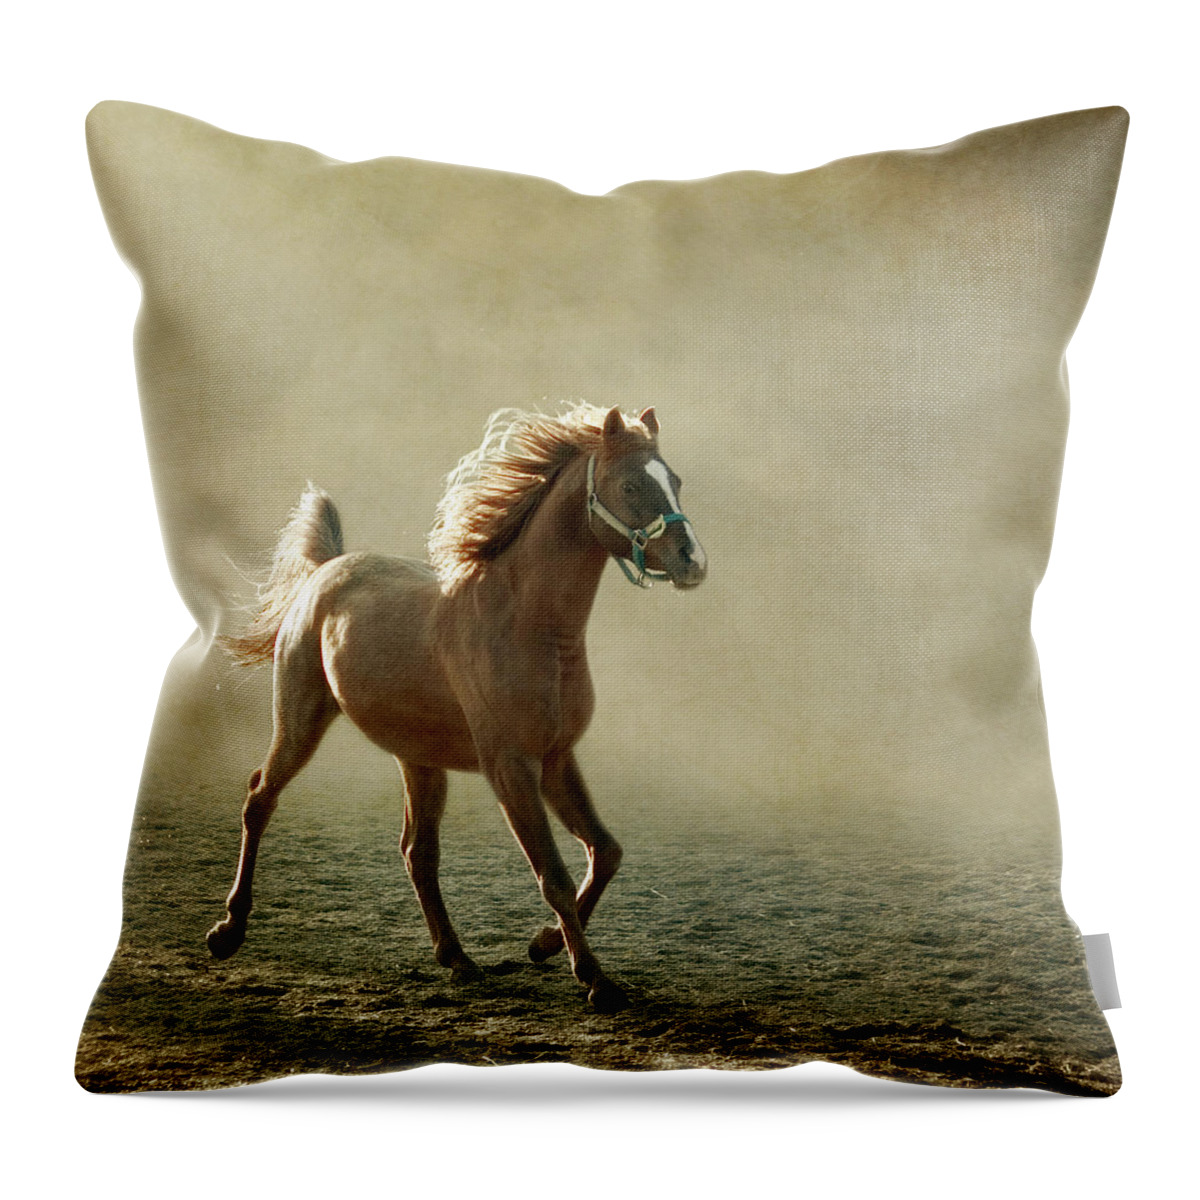 Horse Throw Pillow featuring the photograph Chestnut Arabian Horse by Christiana Stawski